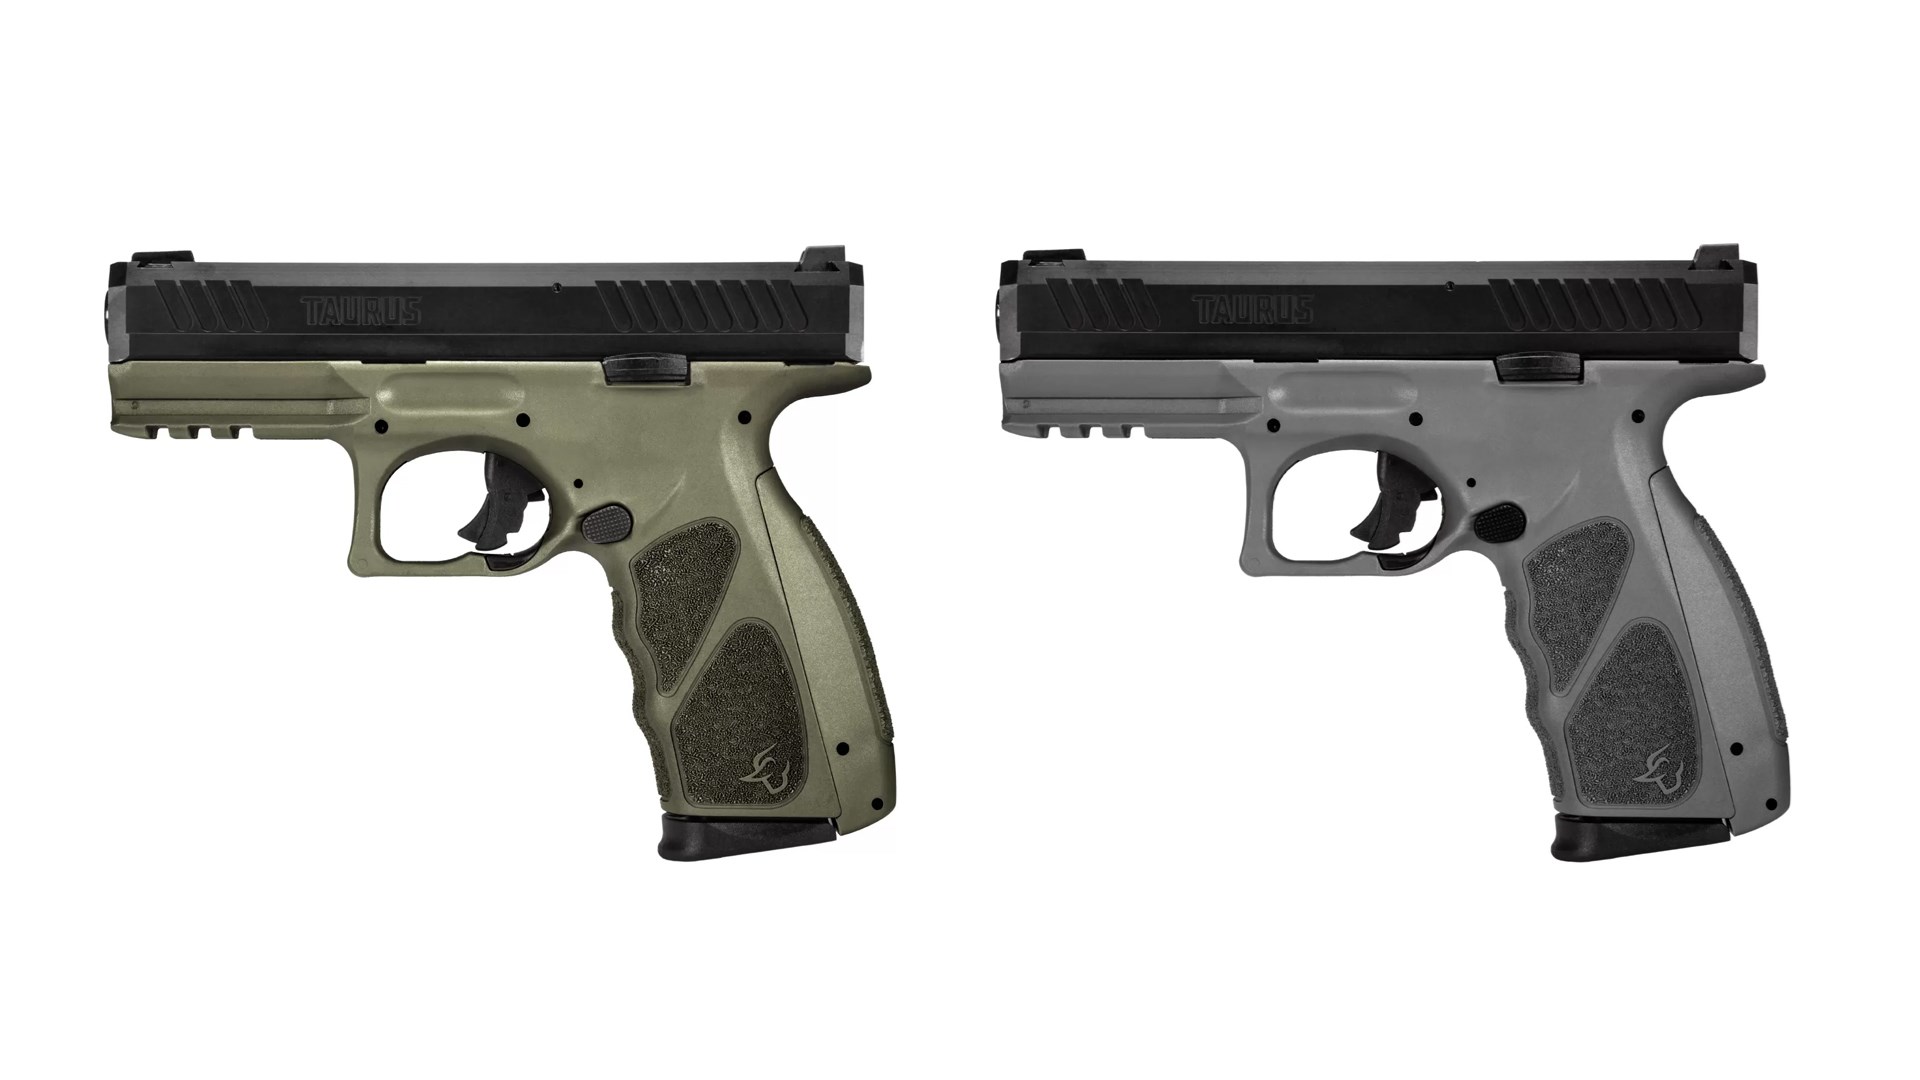 Taurus TS9 left side shown with gray and OD green frames.